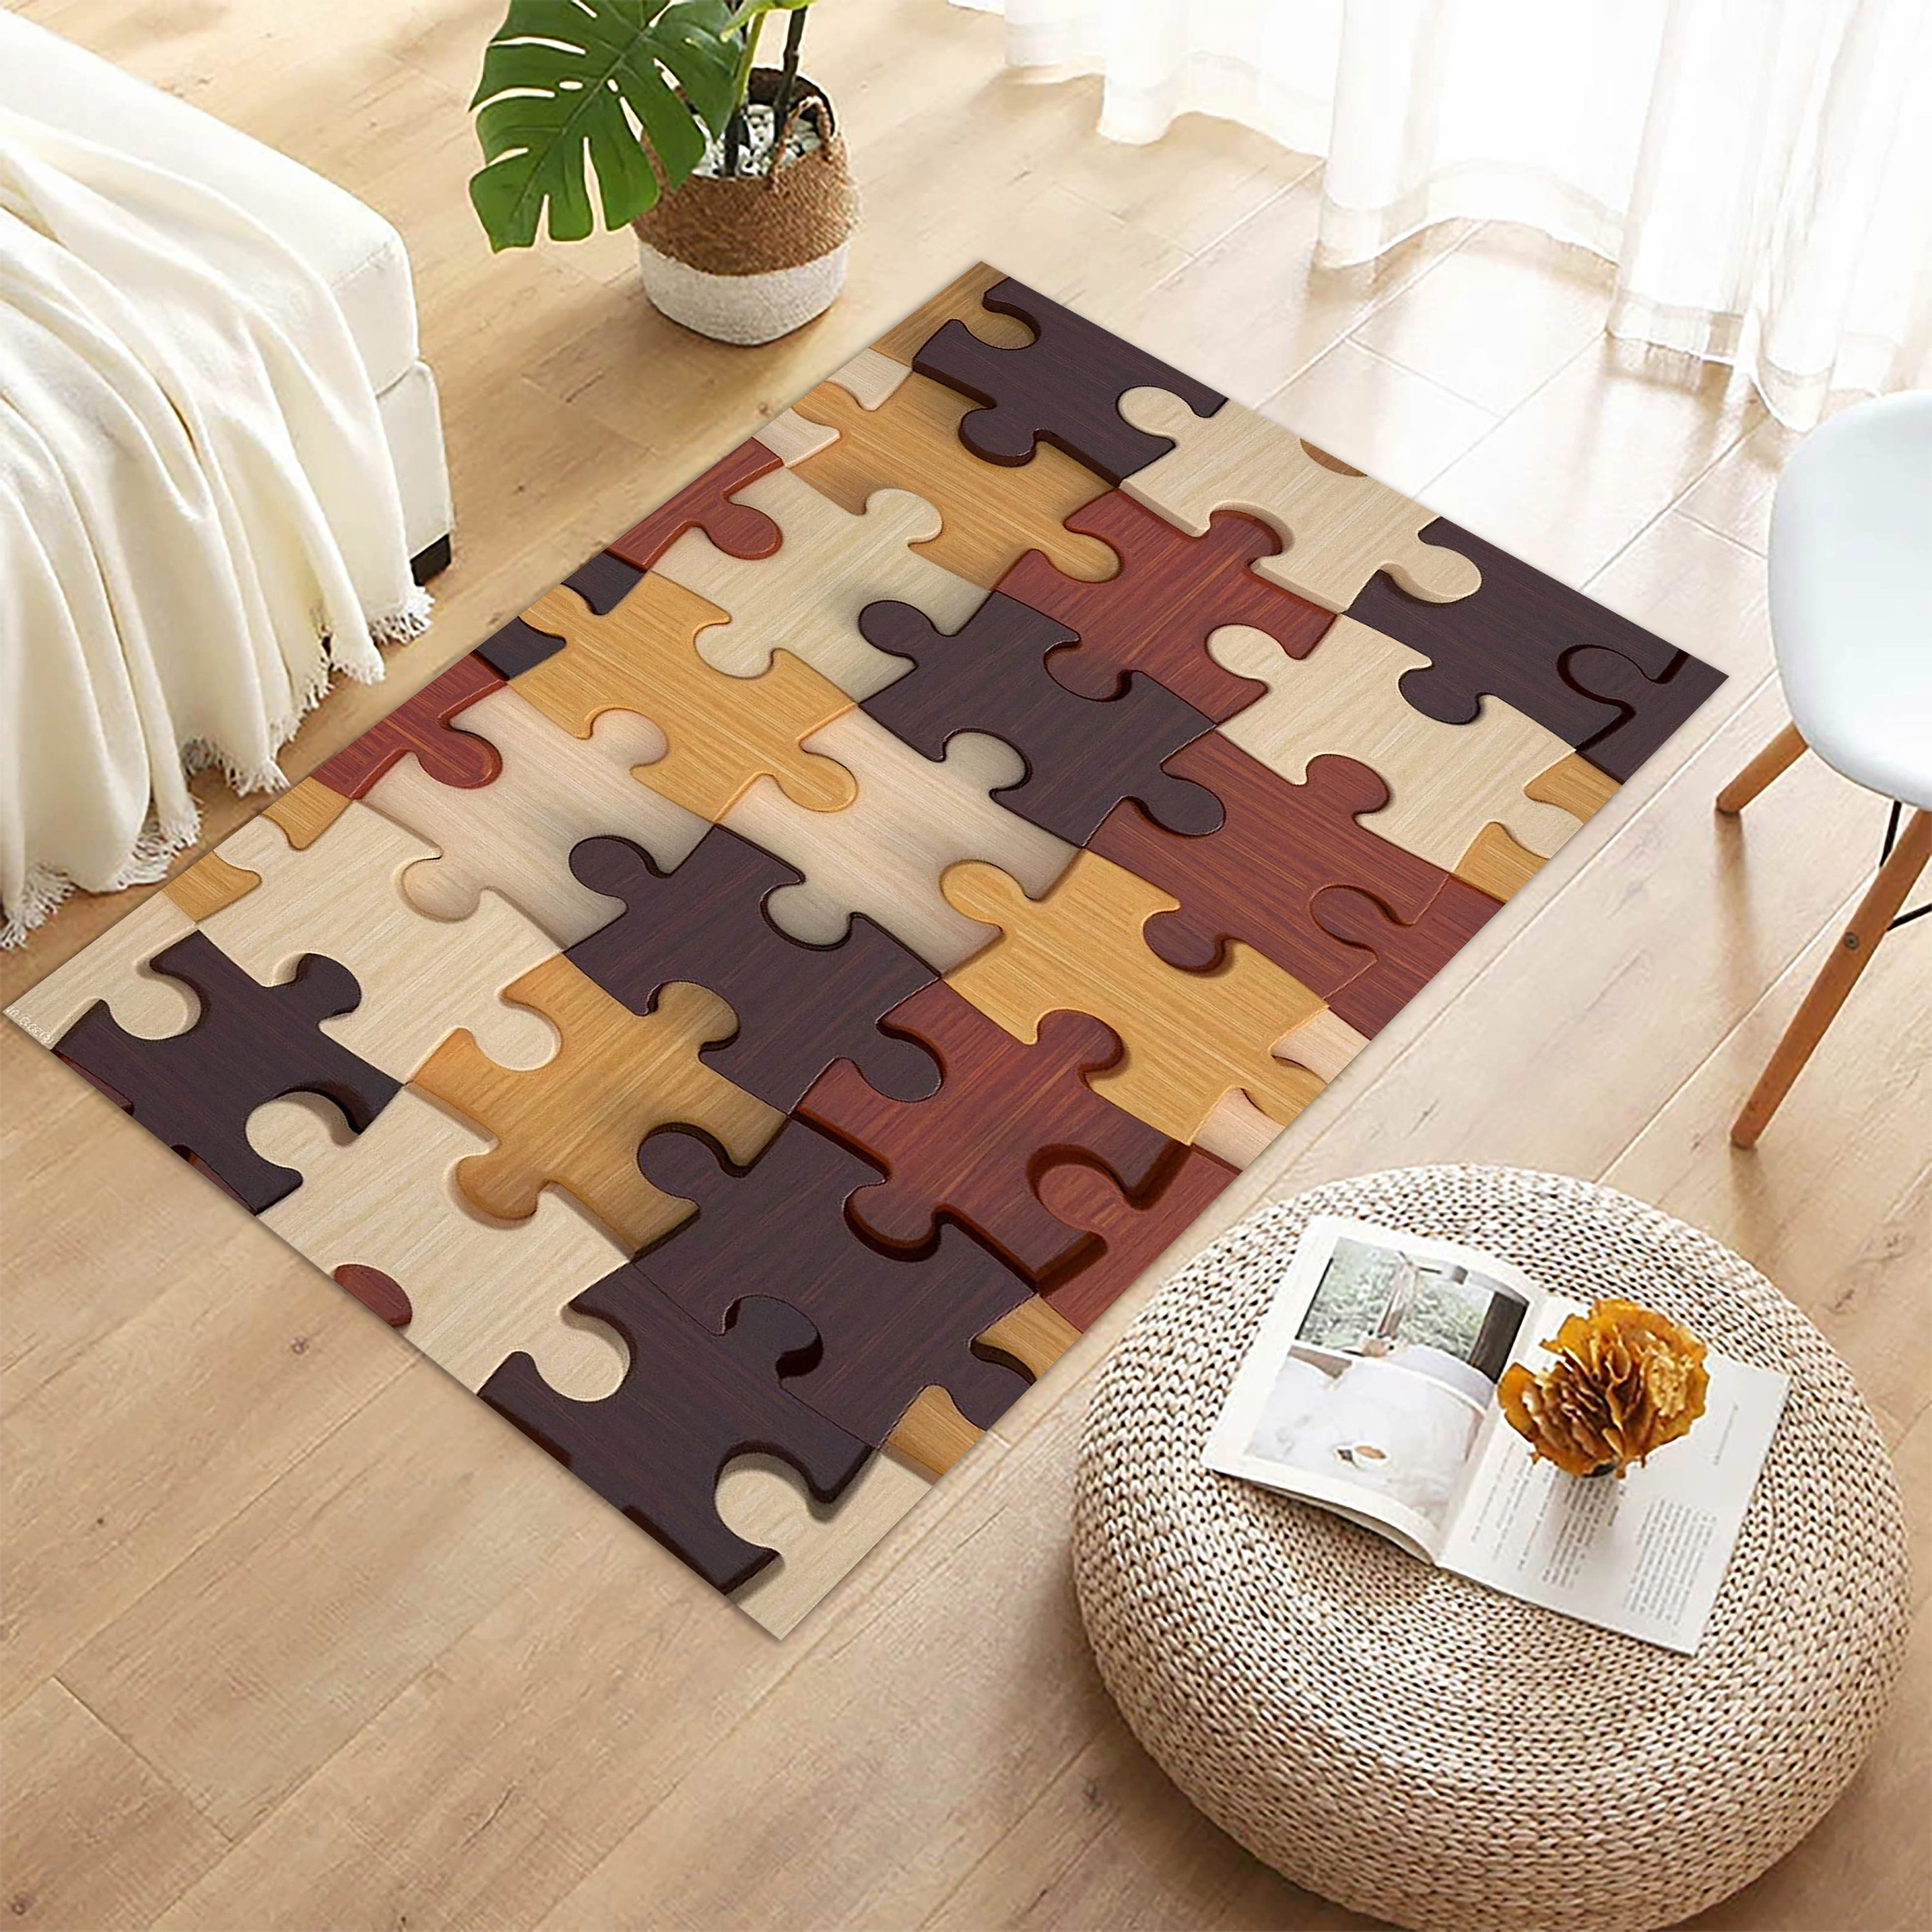 Puzzle Rug,puzzle Piece Rug,puzzle Rug,colorful Rug,living Room